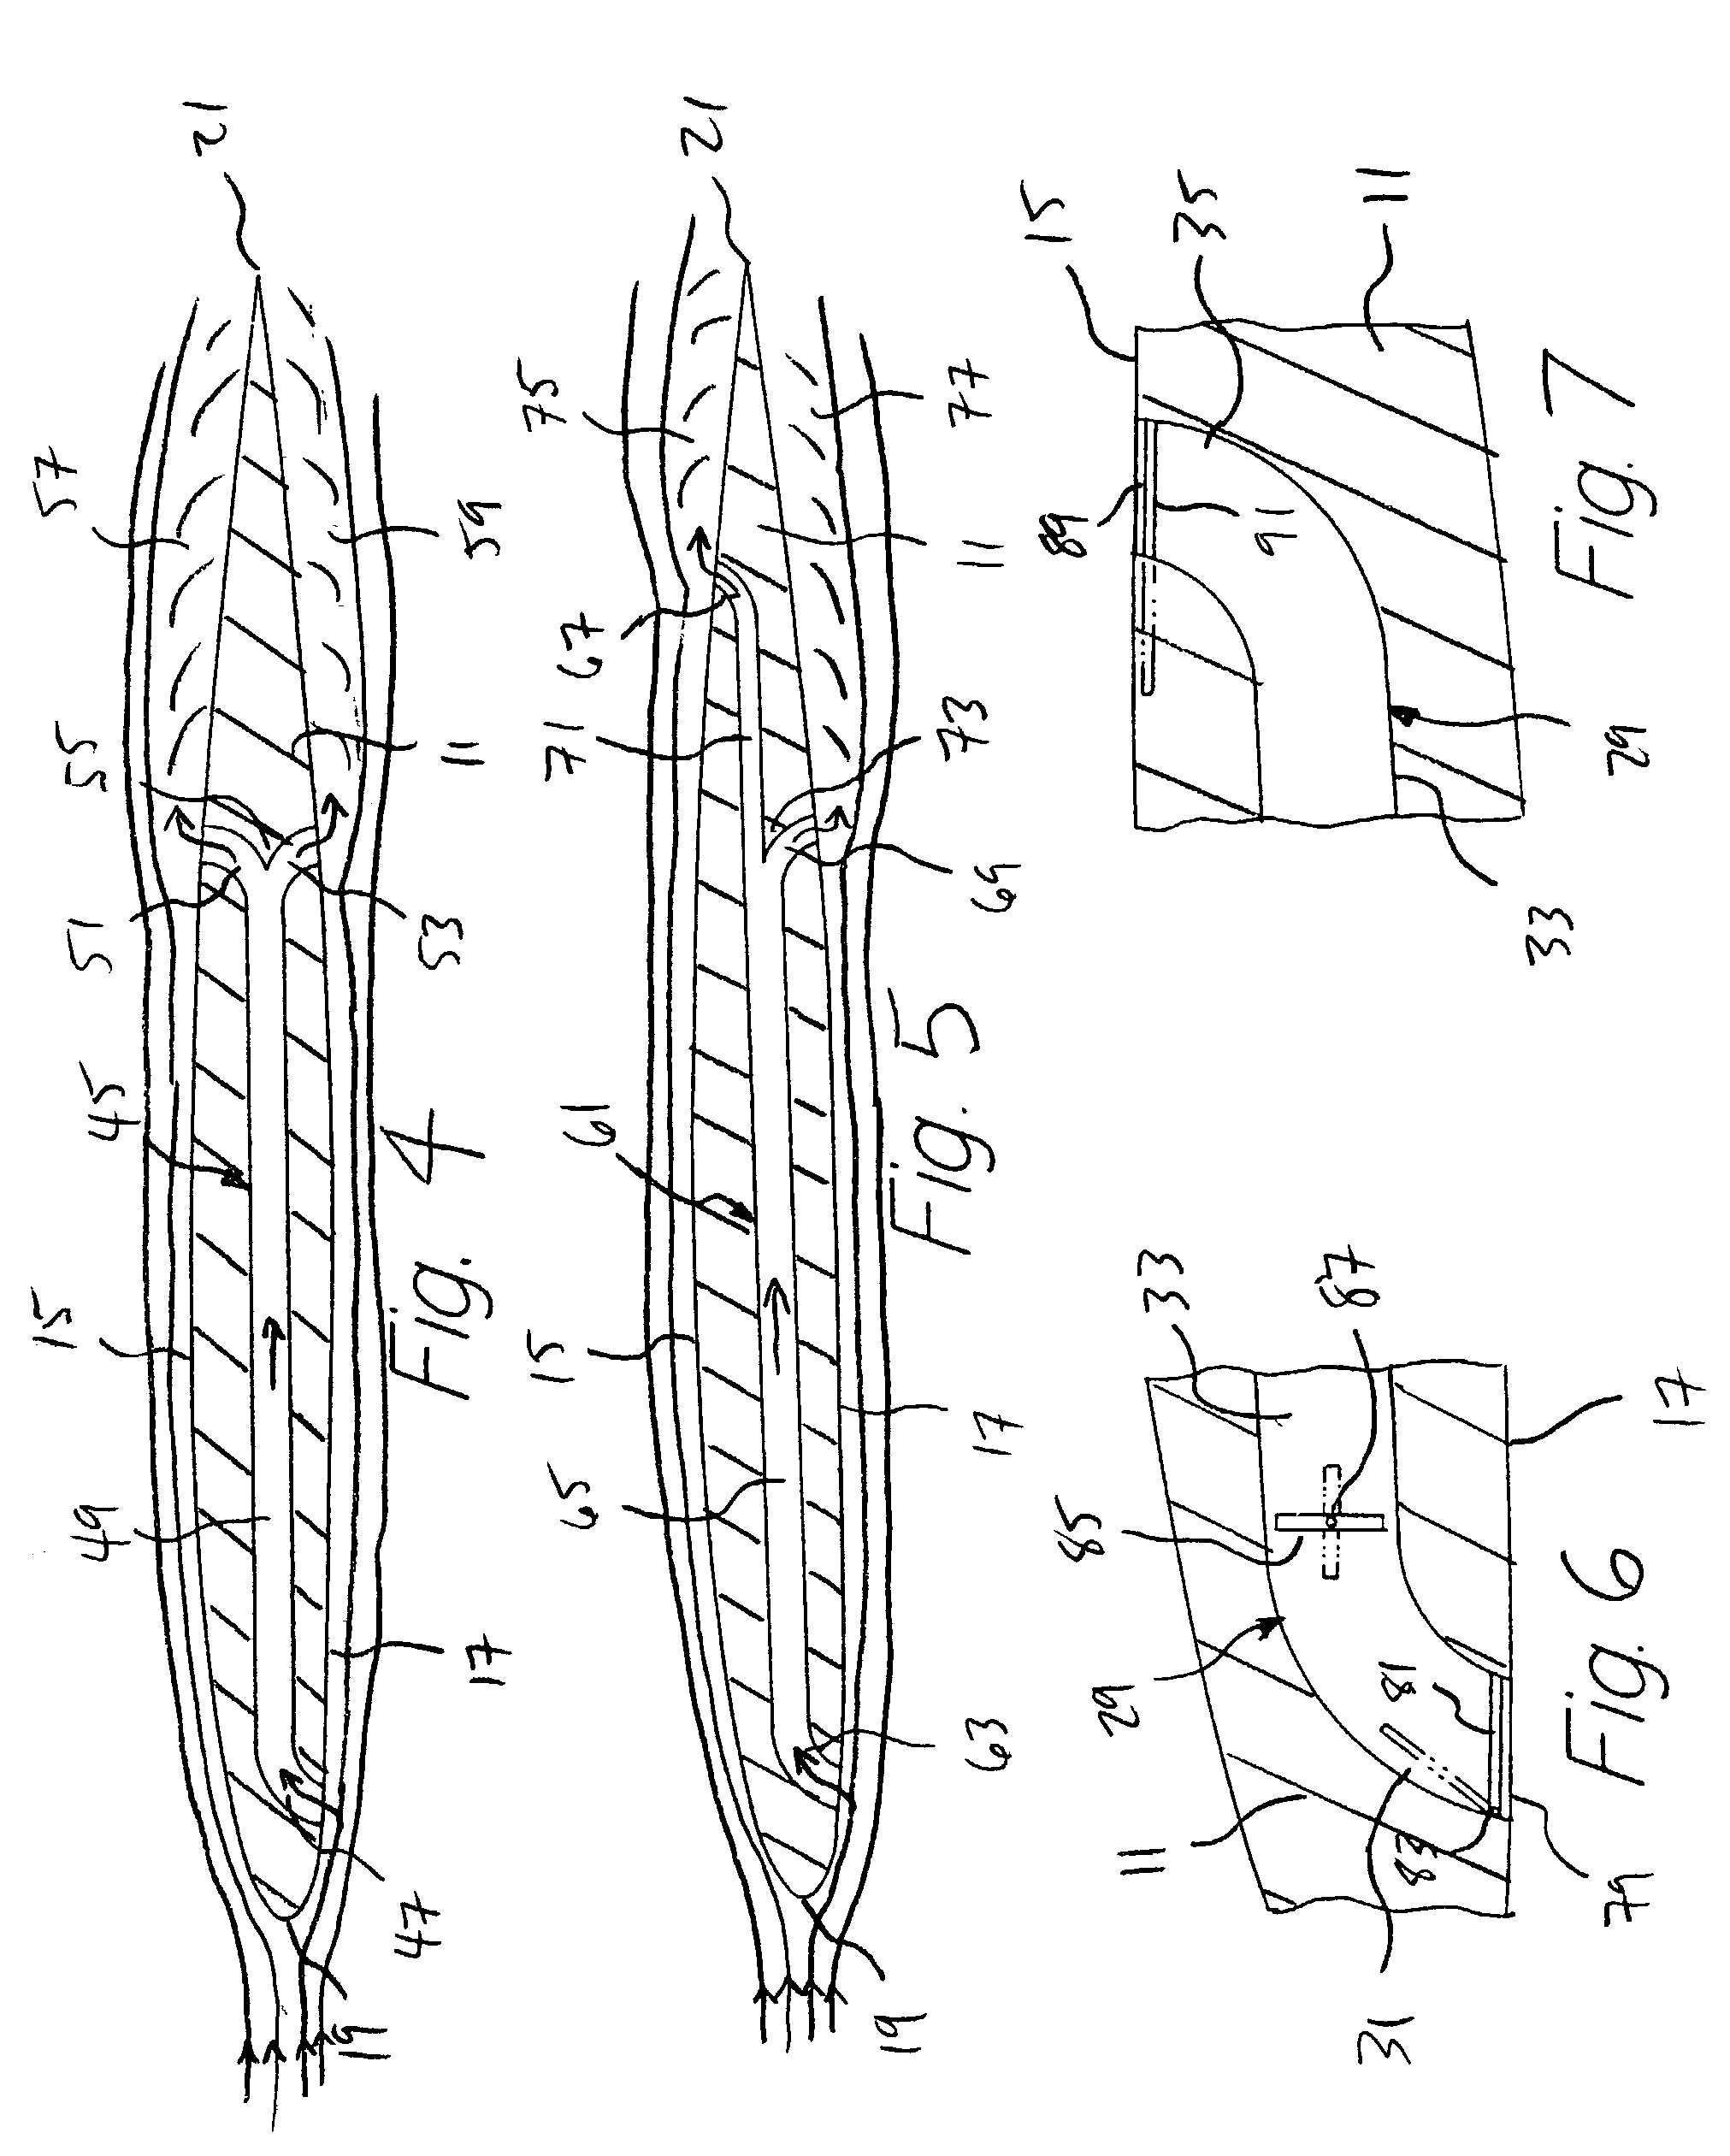 Passive jet spoiler for yaw control of an aircraft